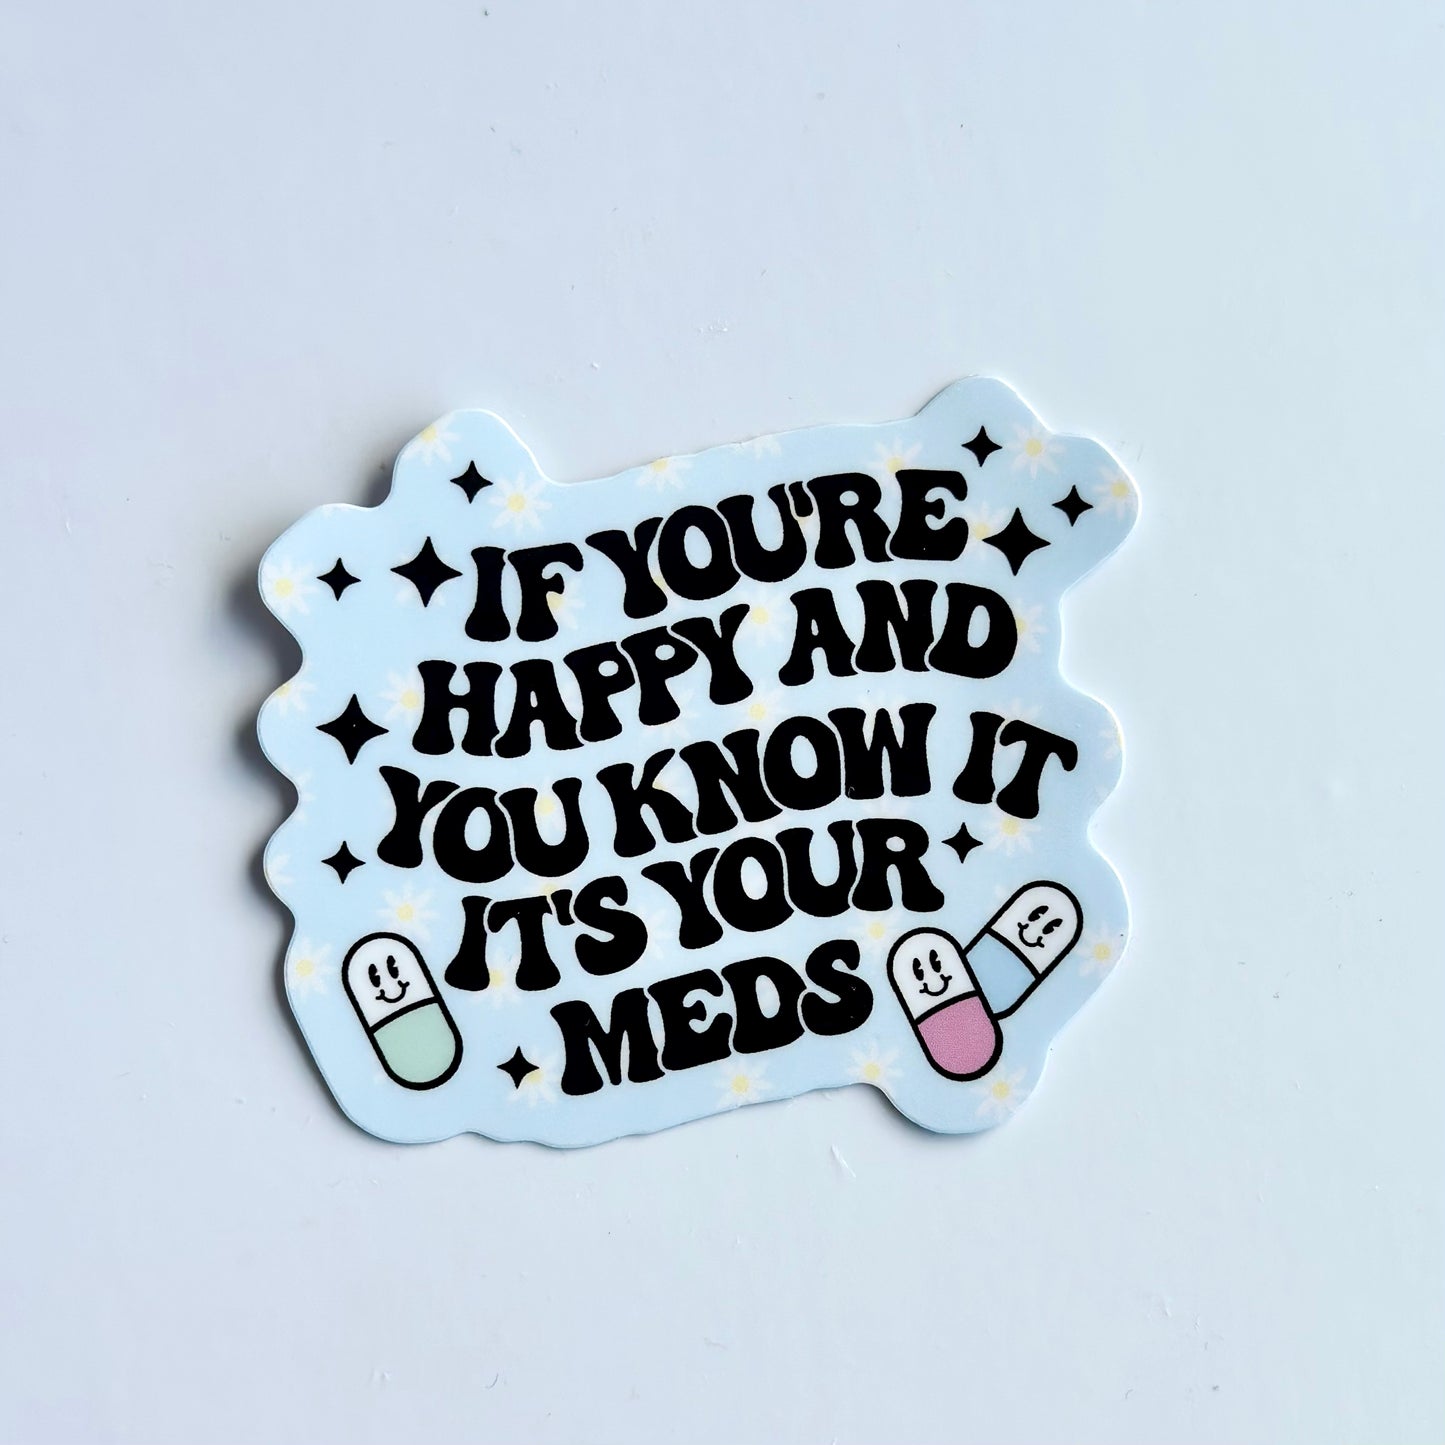 If you're happy and you know it it's your meds - Waterproof Vinyl Sticker